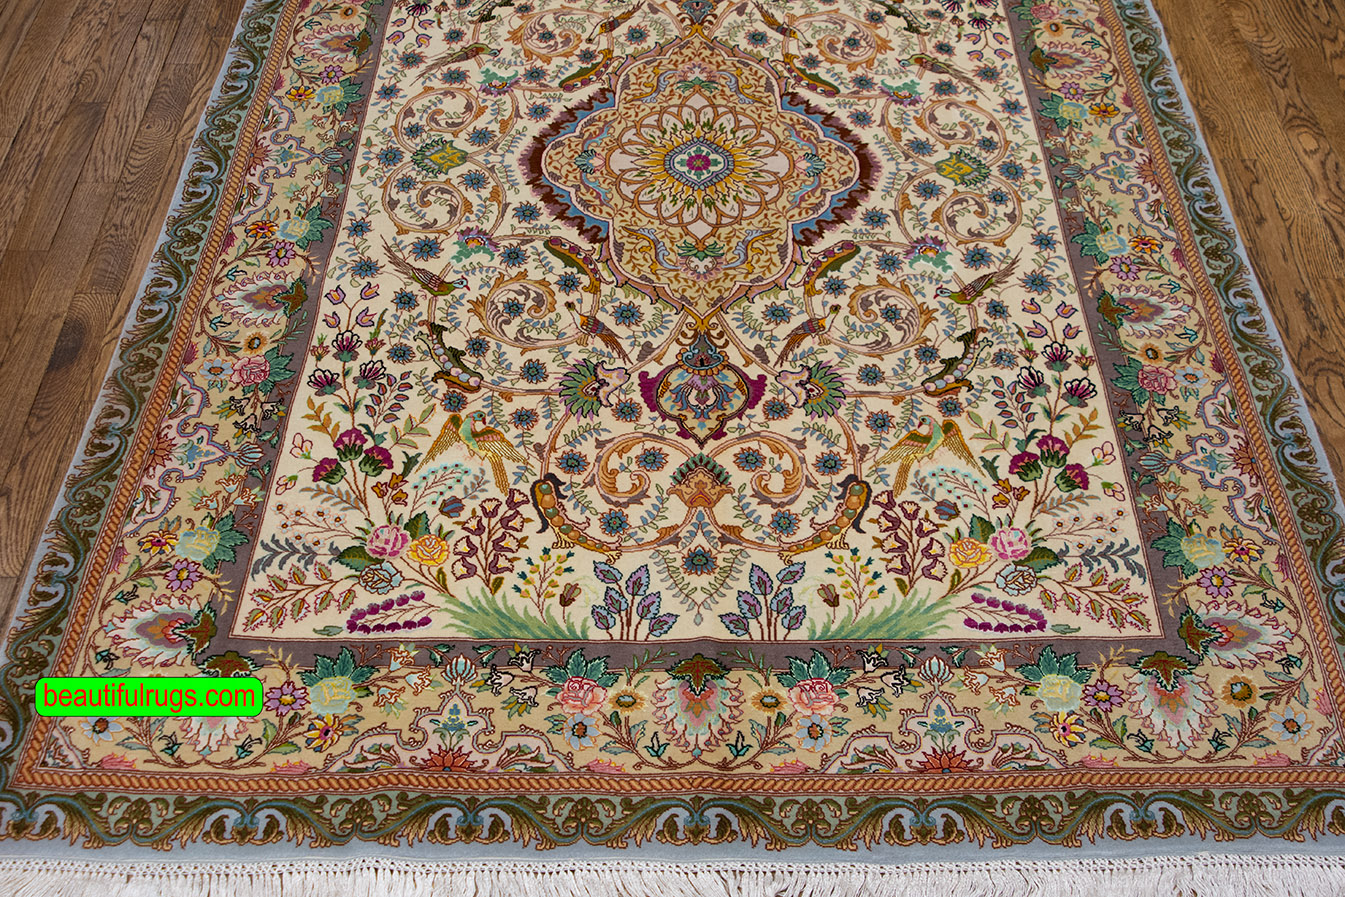 https://beautifulrugs.com/wp-content/uploads/2023/01/753-2-5x7-Area-Rugs-Traditional-Rug-Persian-Tabriz-Wool-and-Silk-Rug.jpg